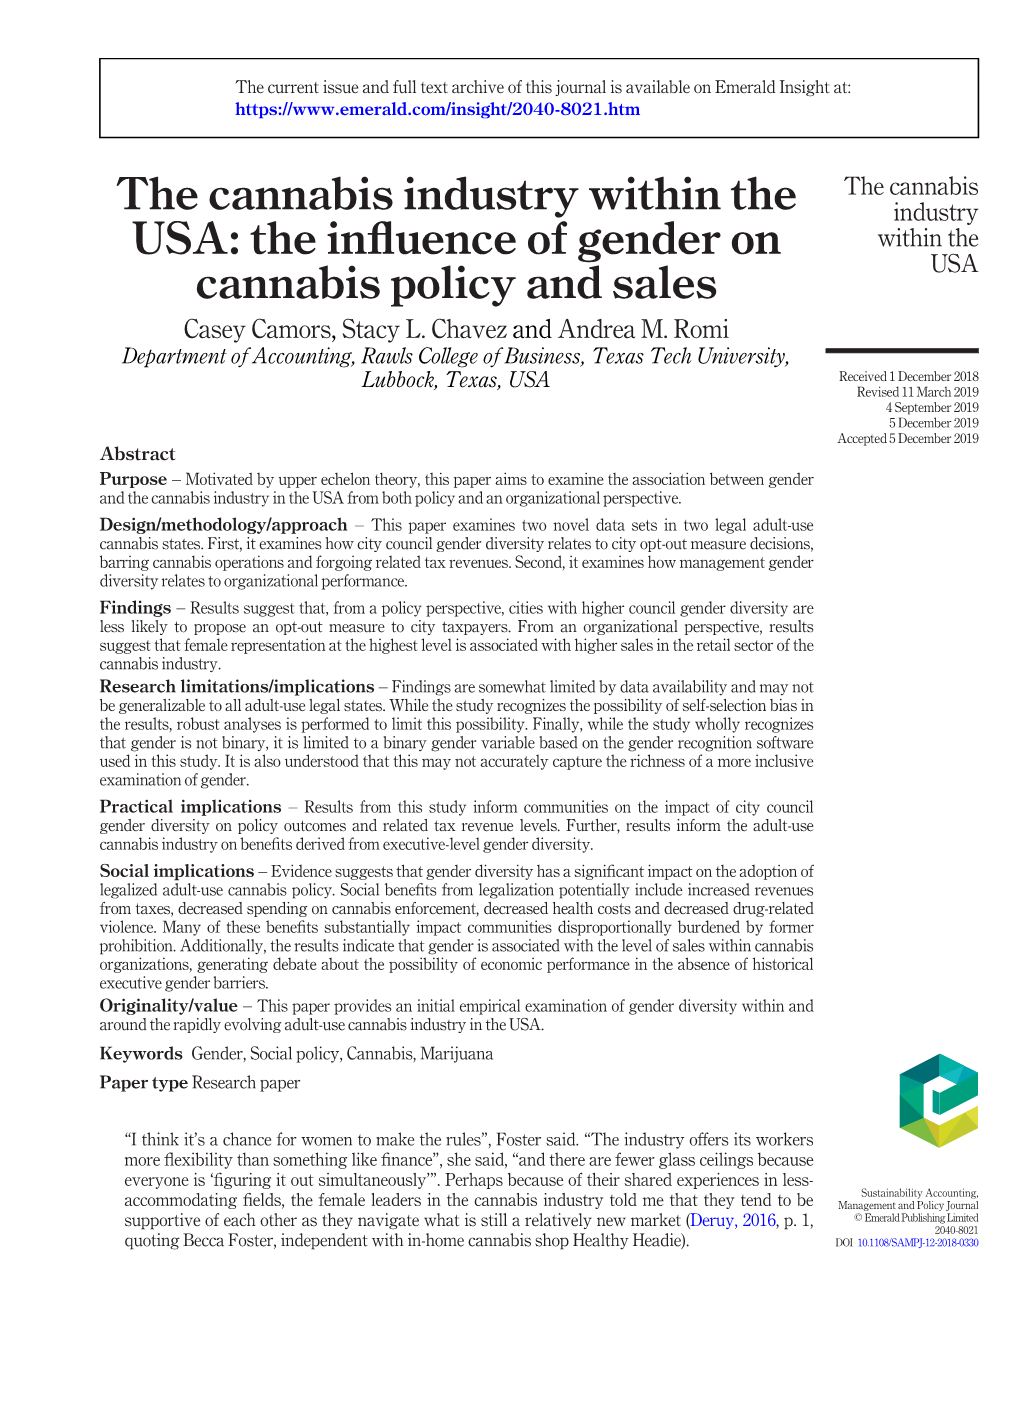 The Influence of Gender on Cannabis Policy and Sales